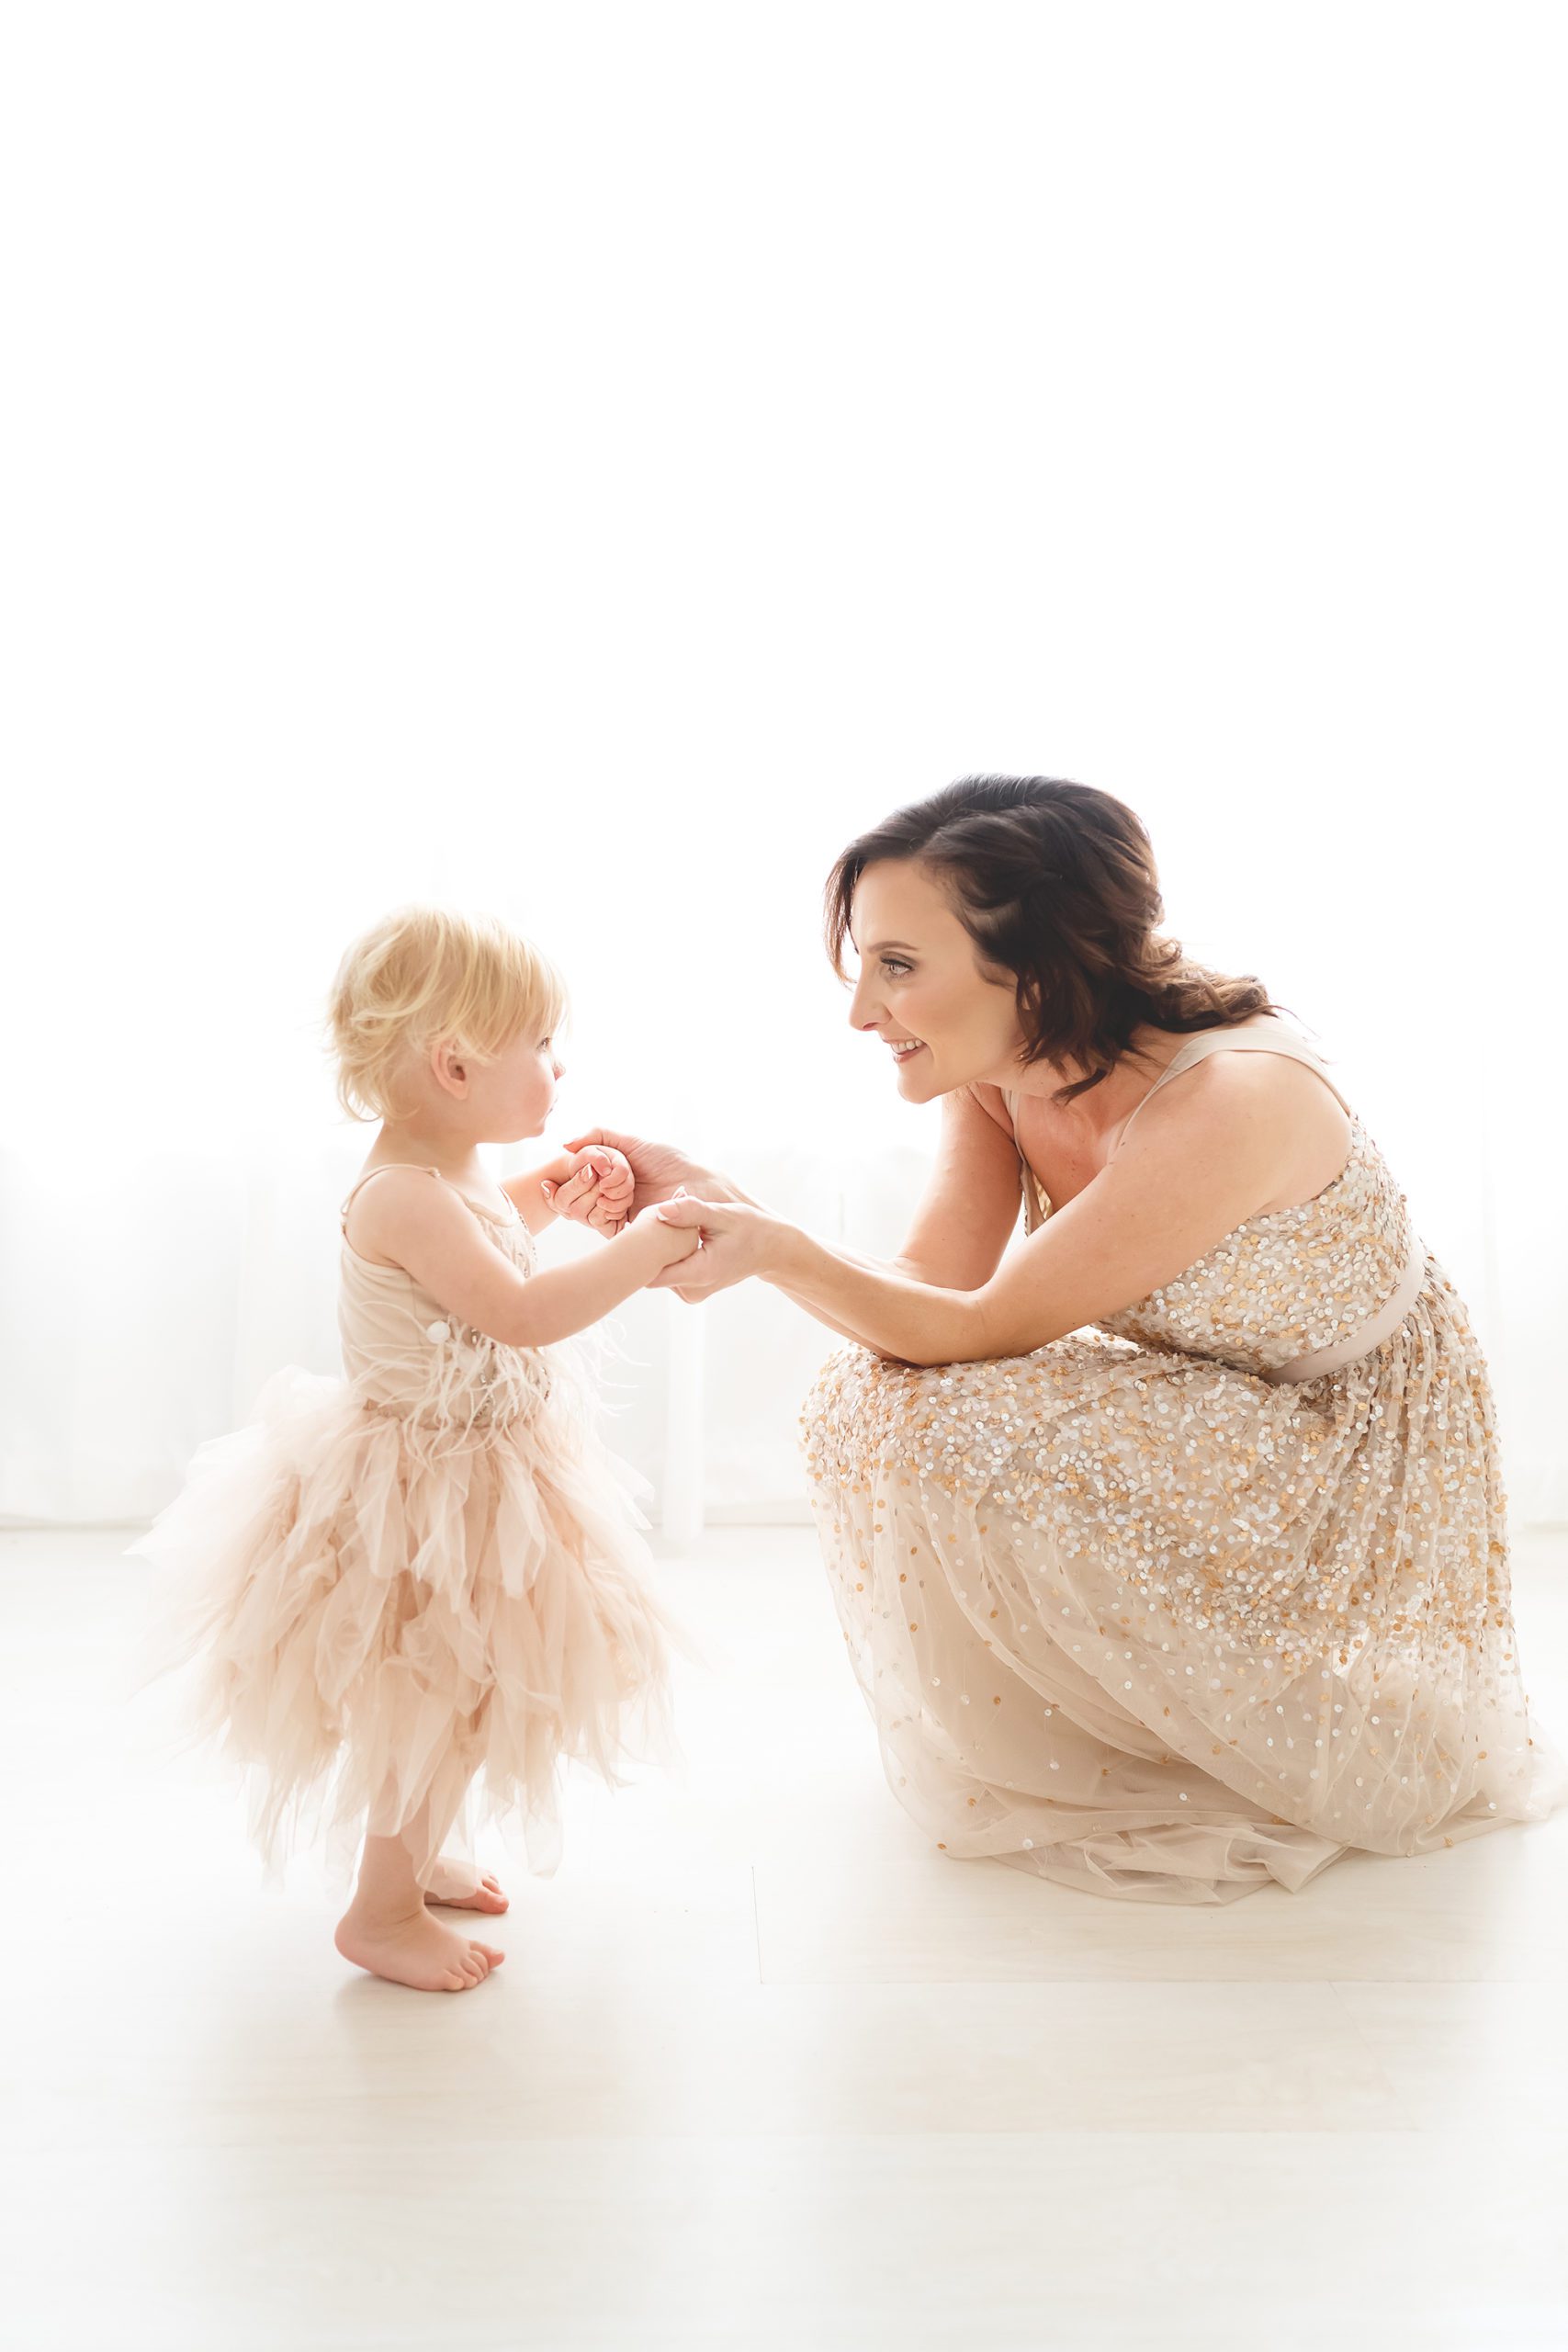 Mom and baby girl standing up in gold sparkly dresses